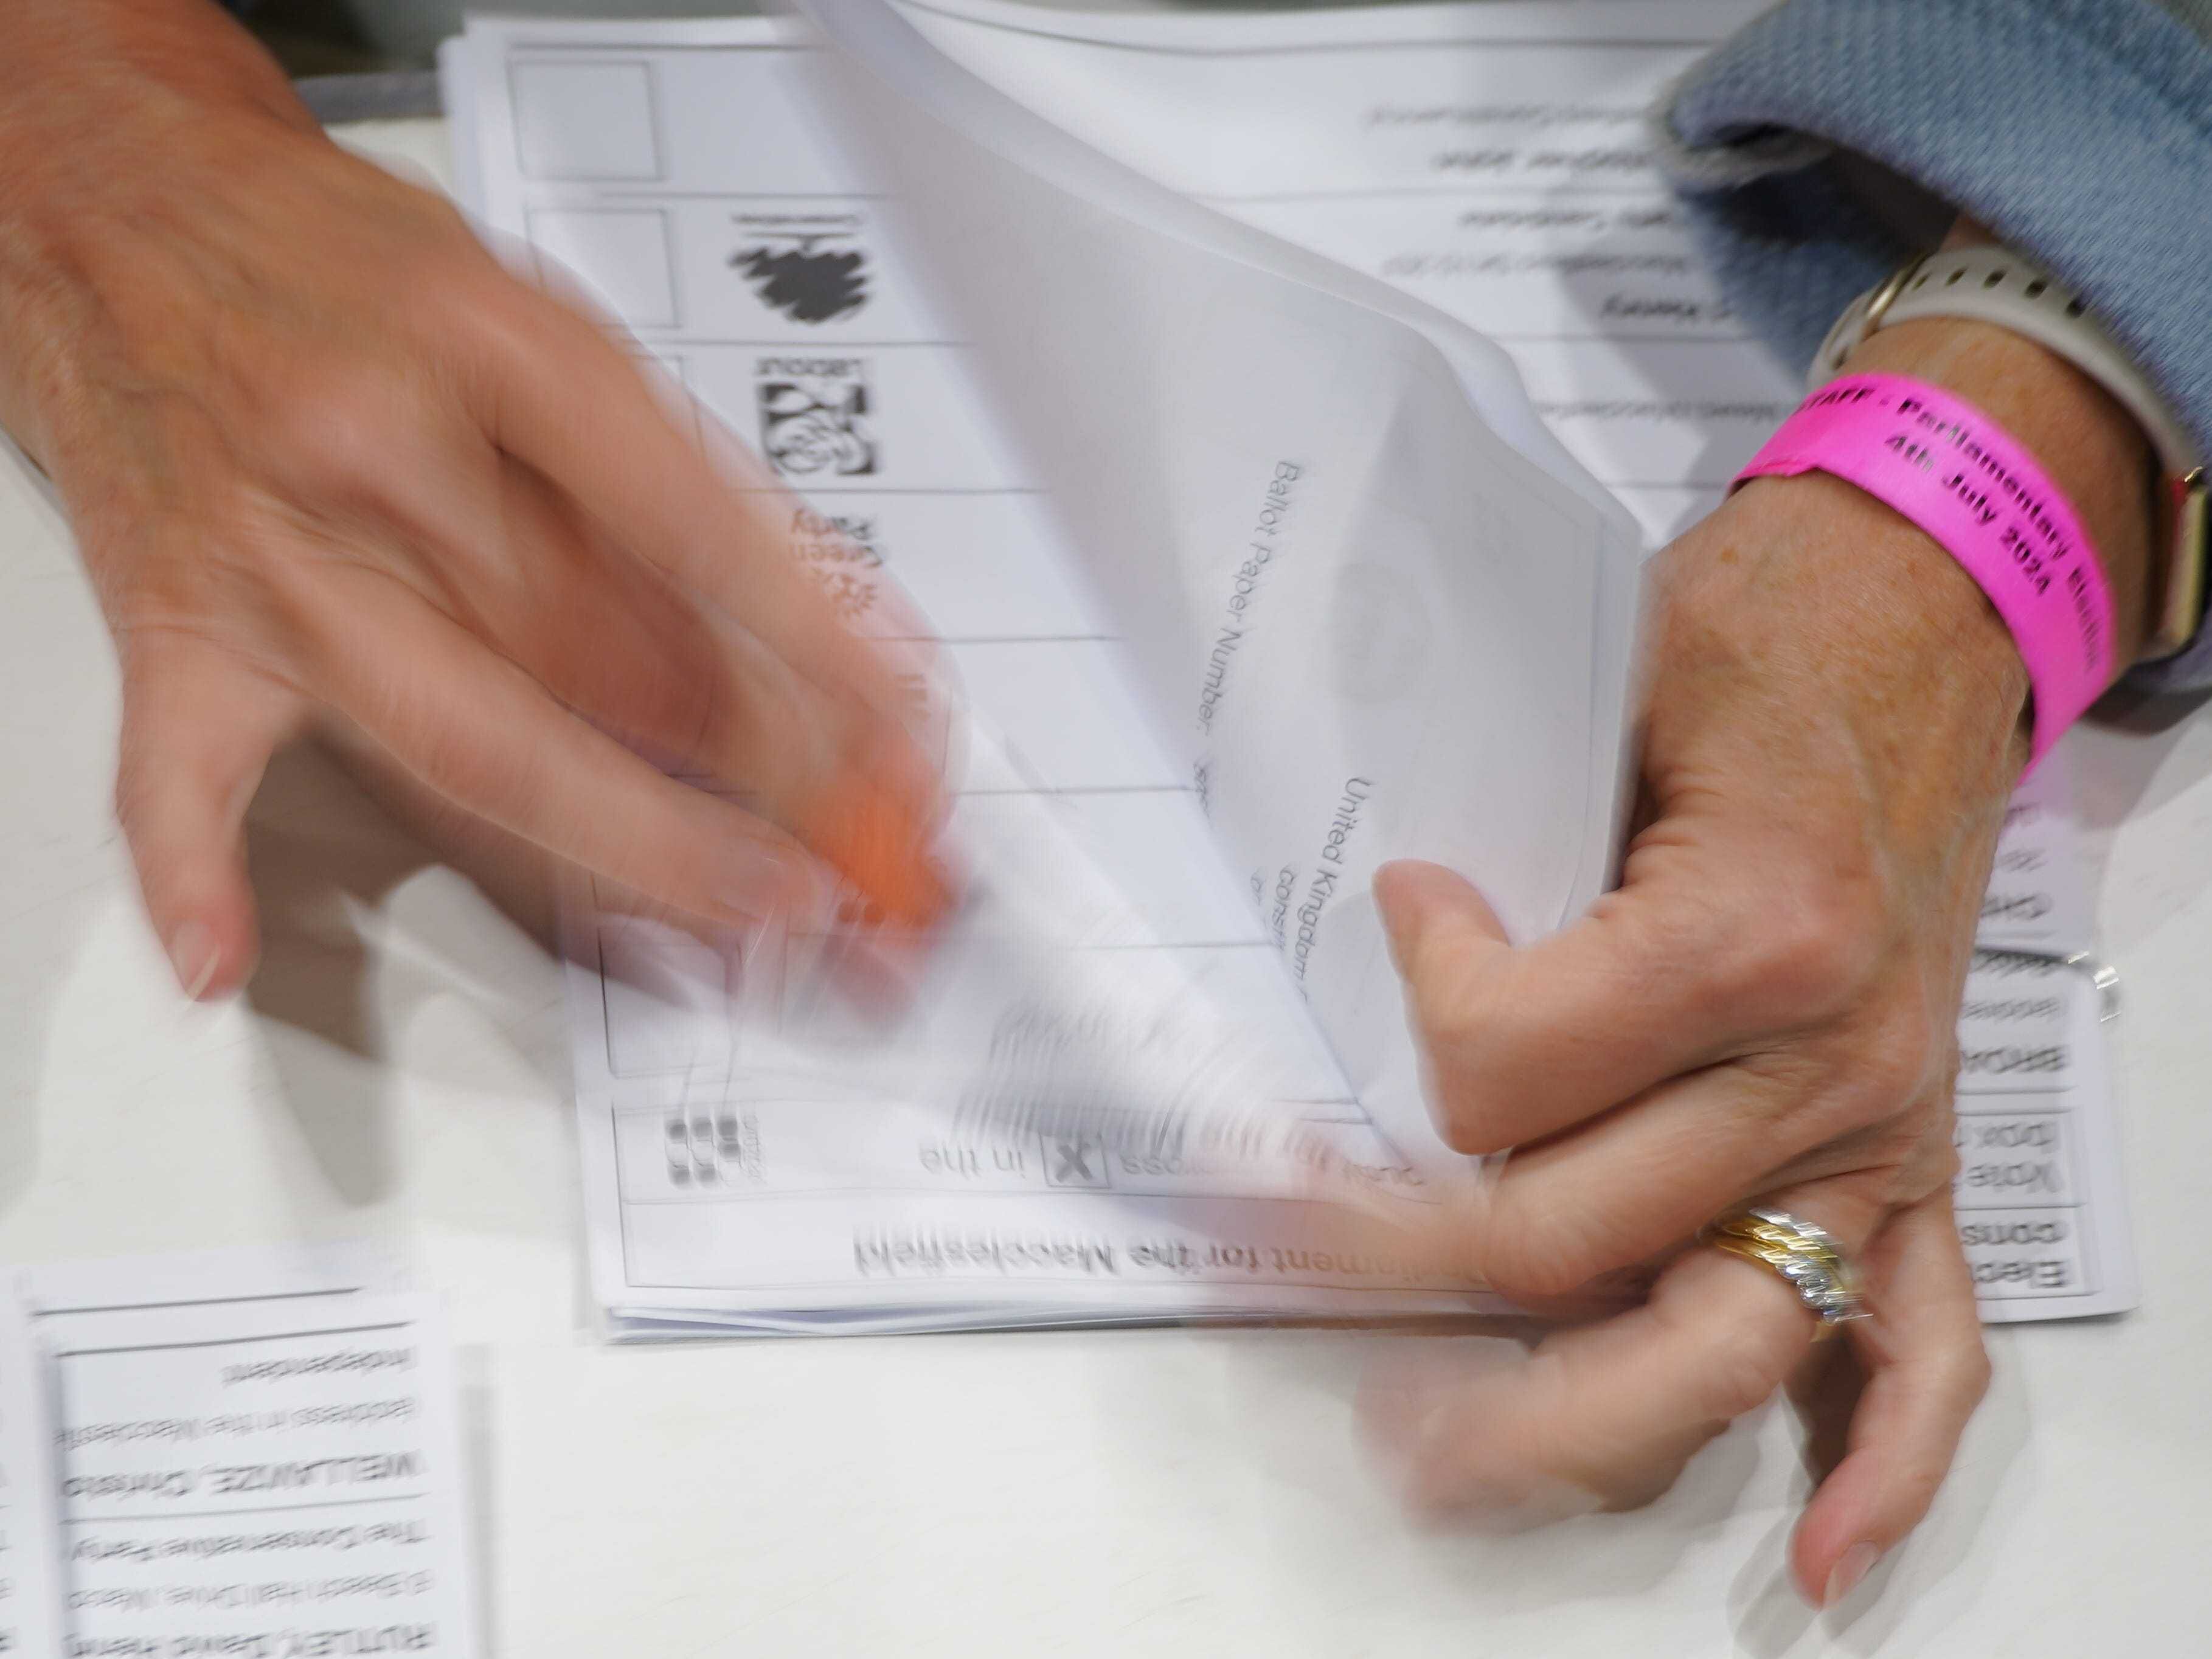 Turnout at General Election lowest for more than 20 years